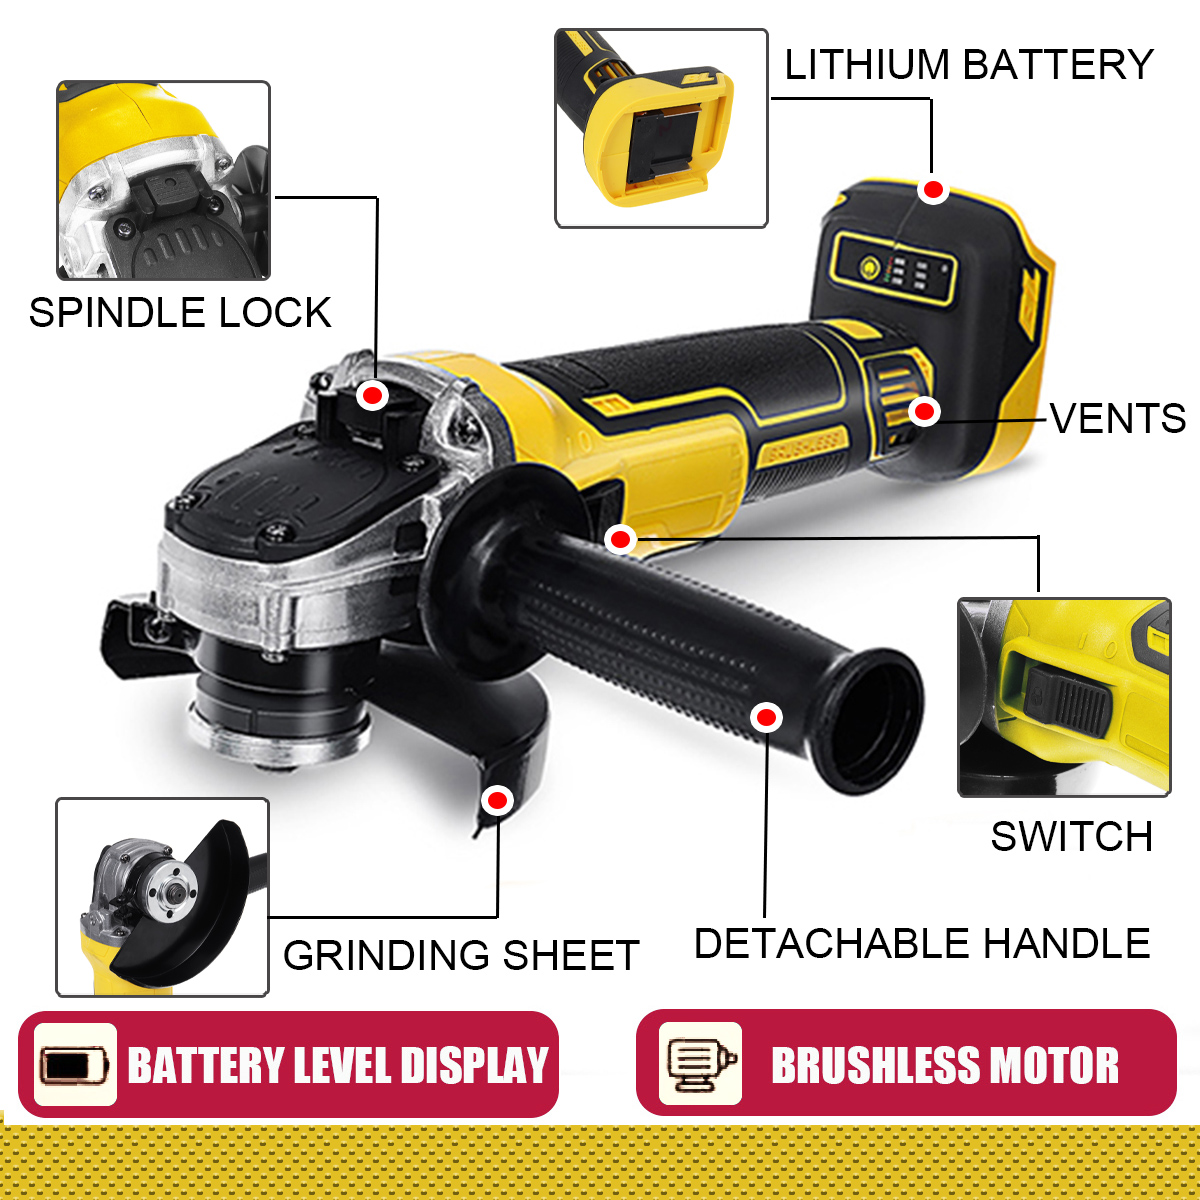 Drillpro-388VF-100mm125mm-Brushless-Angle-Grinder-Wireless-Rechargeable-Wood-Metal-Cutting-Polishing-1874664-7